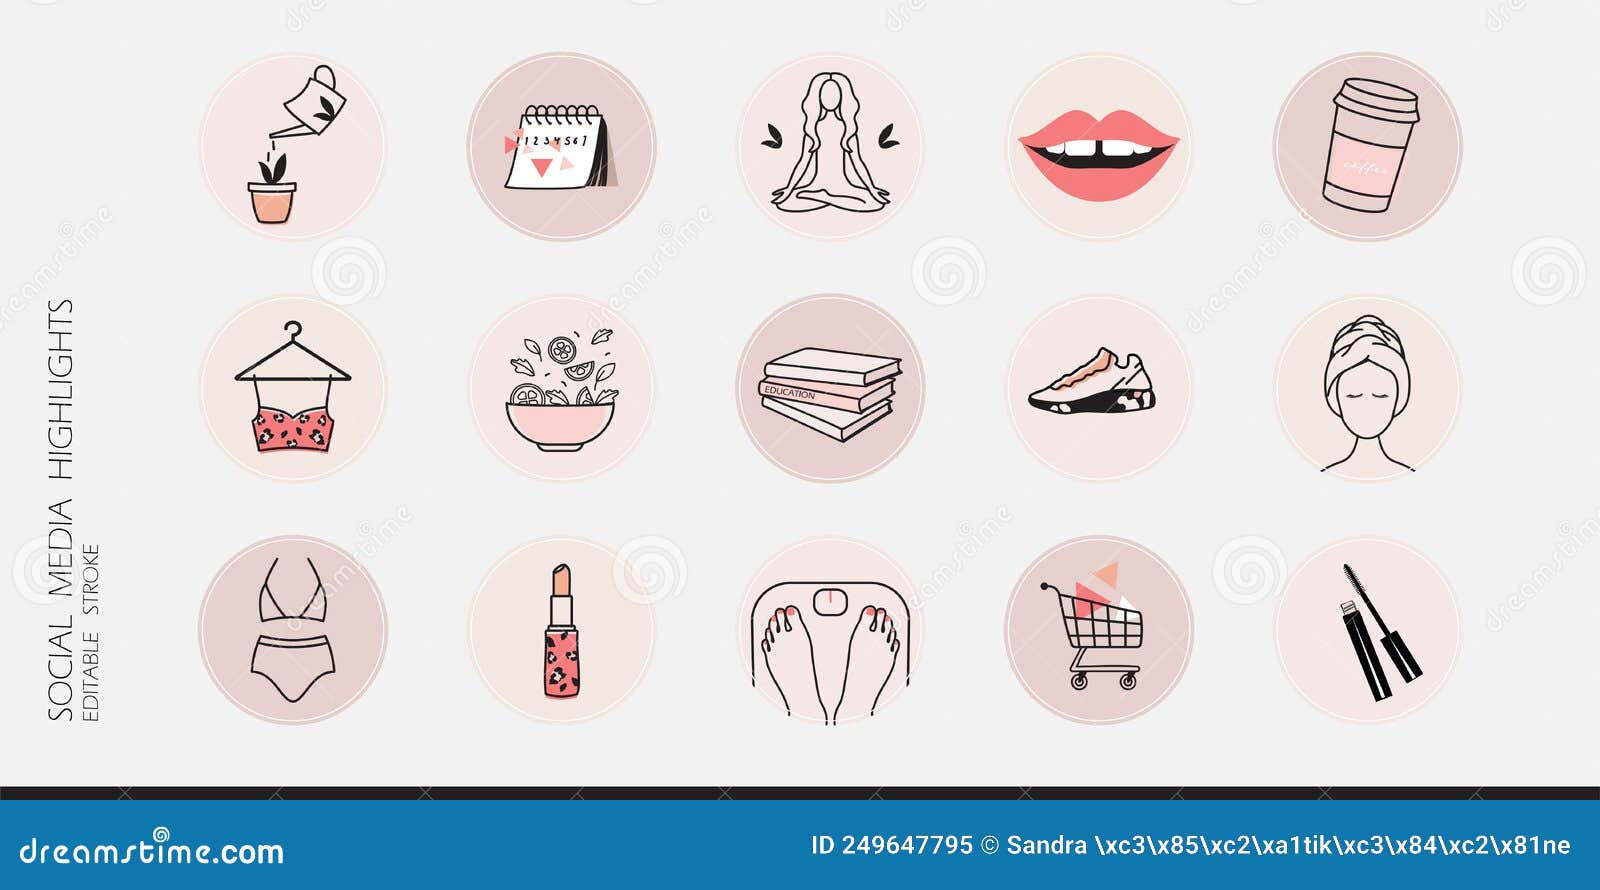 instagram social media highlight cove icons or stickers for beauty, makeup, fashion lifestyle branding